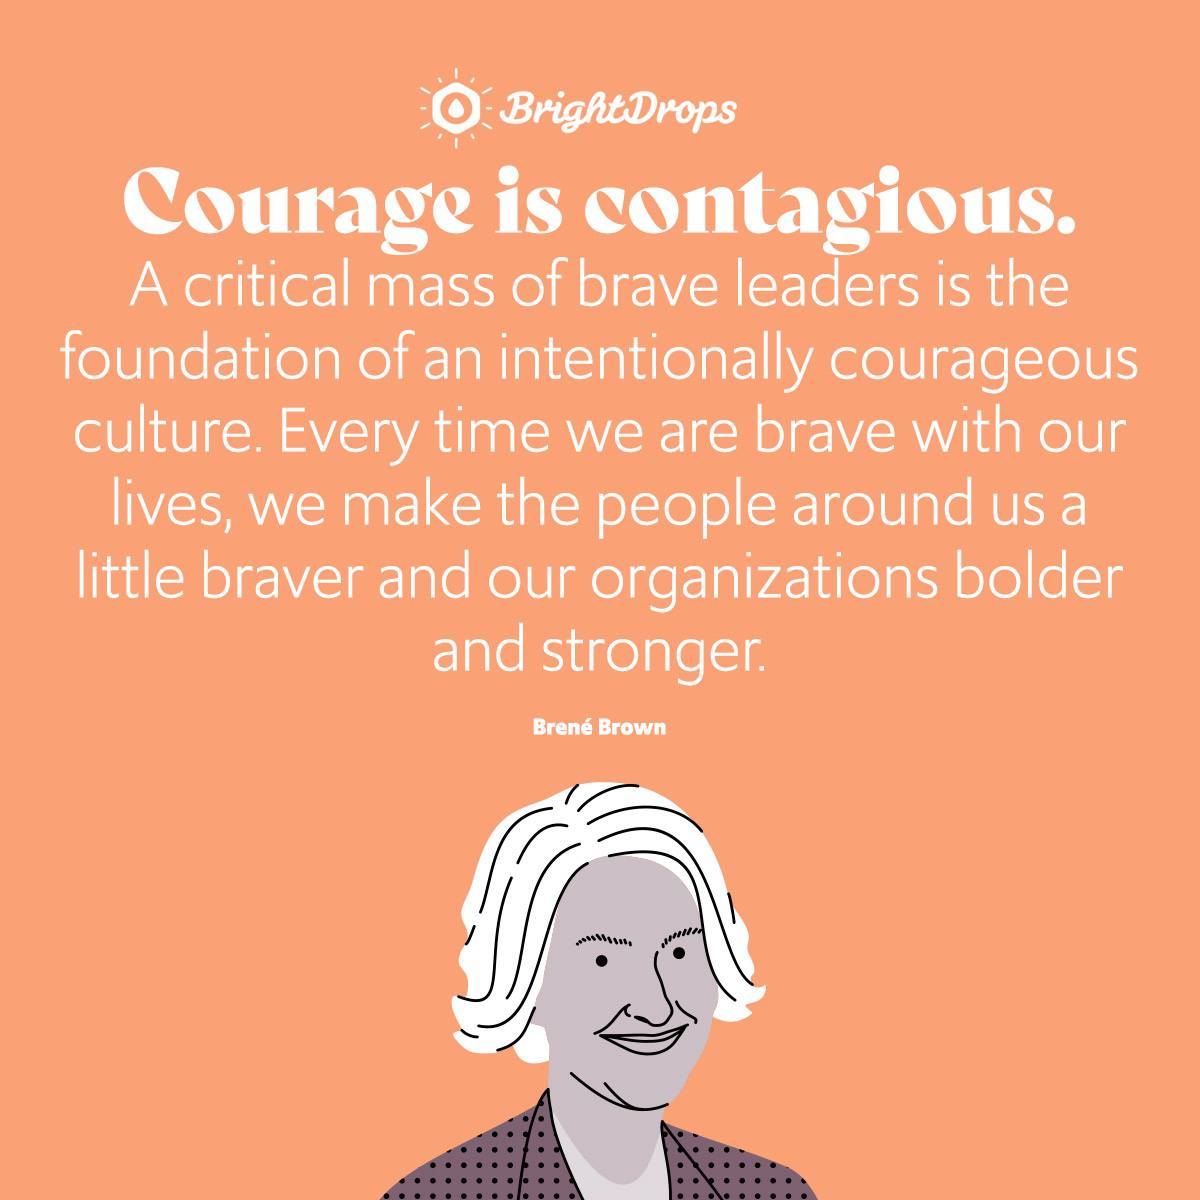 Courage is contagious. A critical mass of brave leaders is the foundation of an intentionally courageous culture. Every time we are brave with our lives, we make the people around us a little braver and our organizations bolder and stronger. - Brene Brown